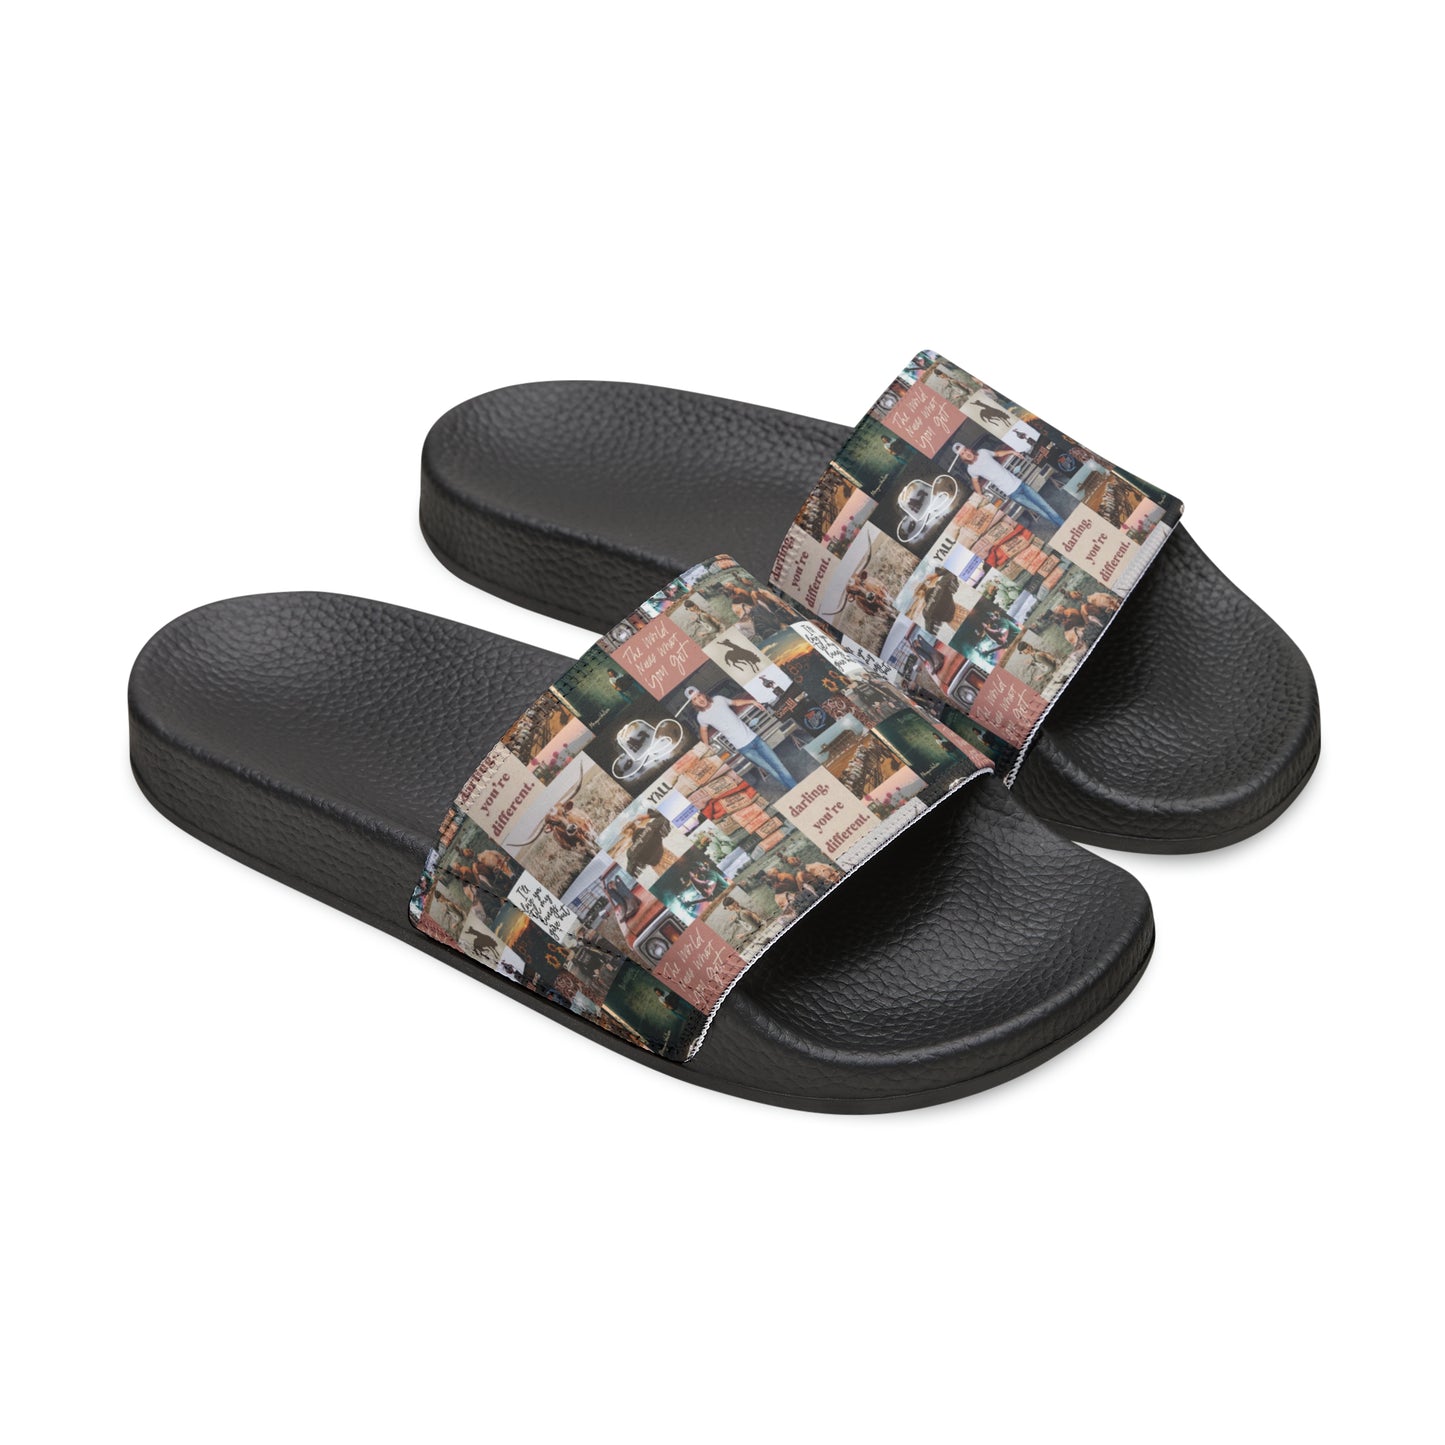 Morgan Wallen Darling You're Different Collage Youth Slide Sandals